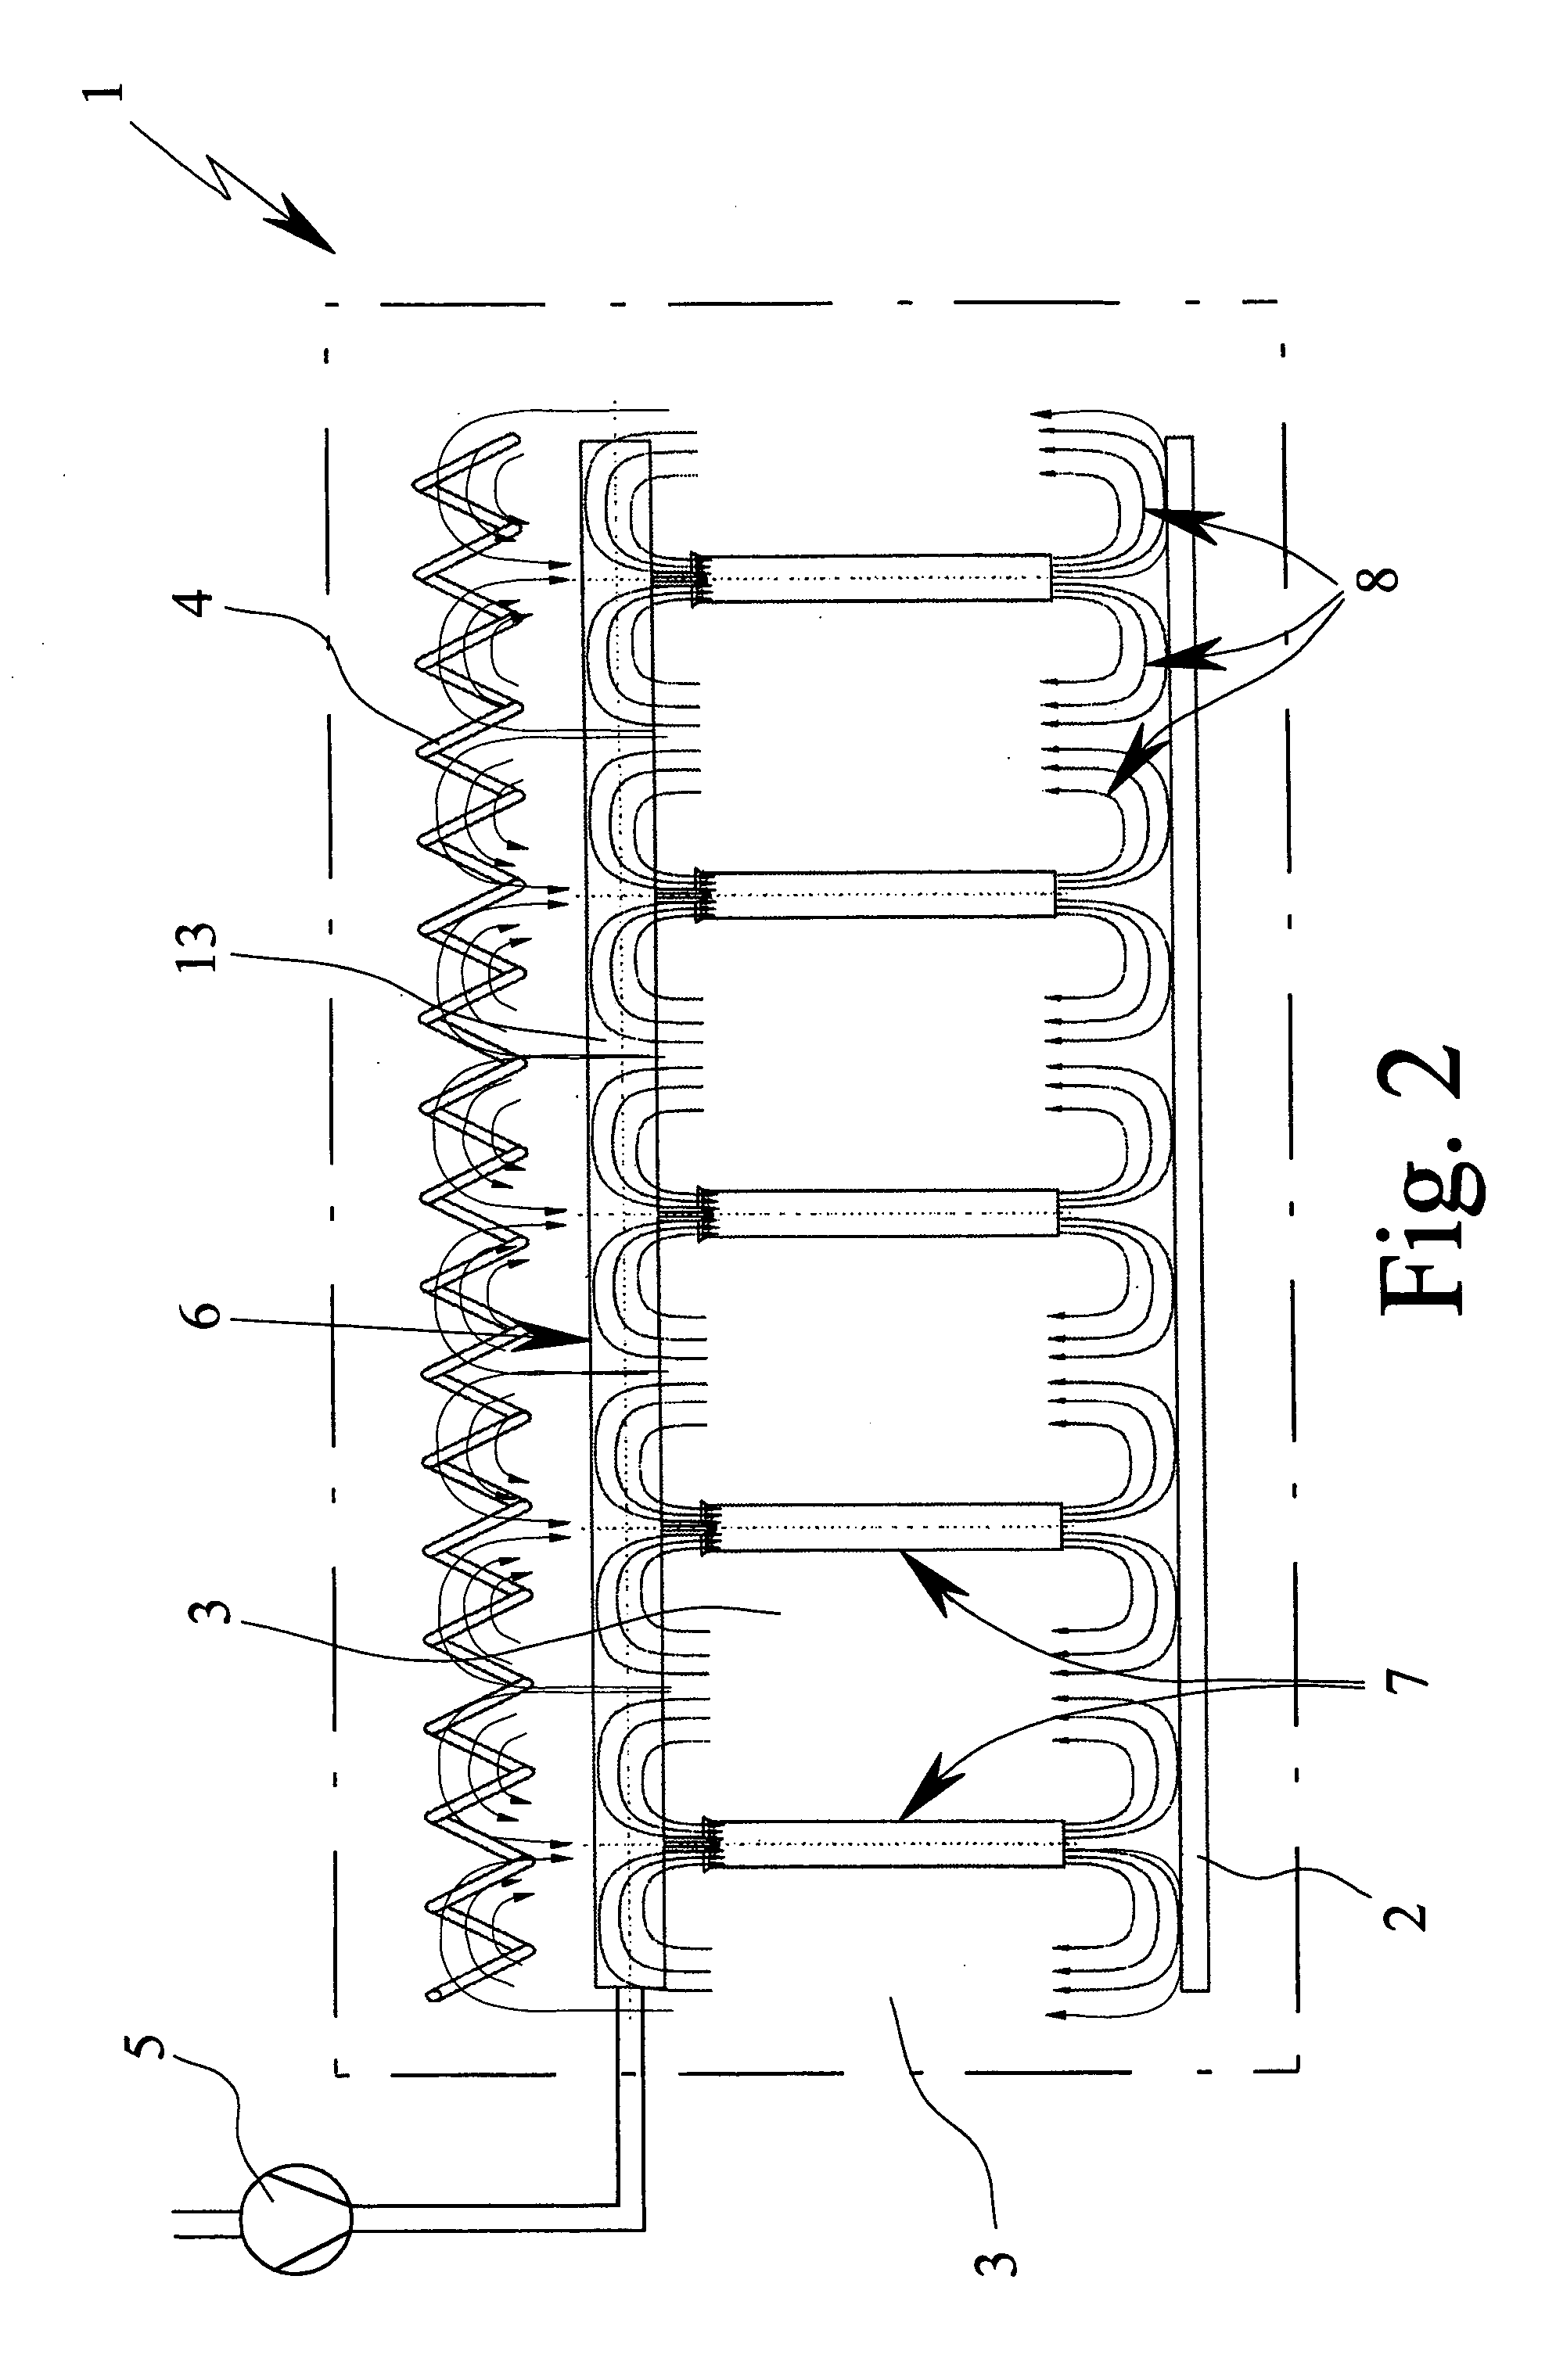 System and process for heat treatment of glass